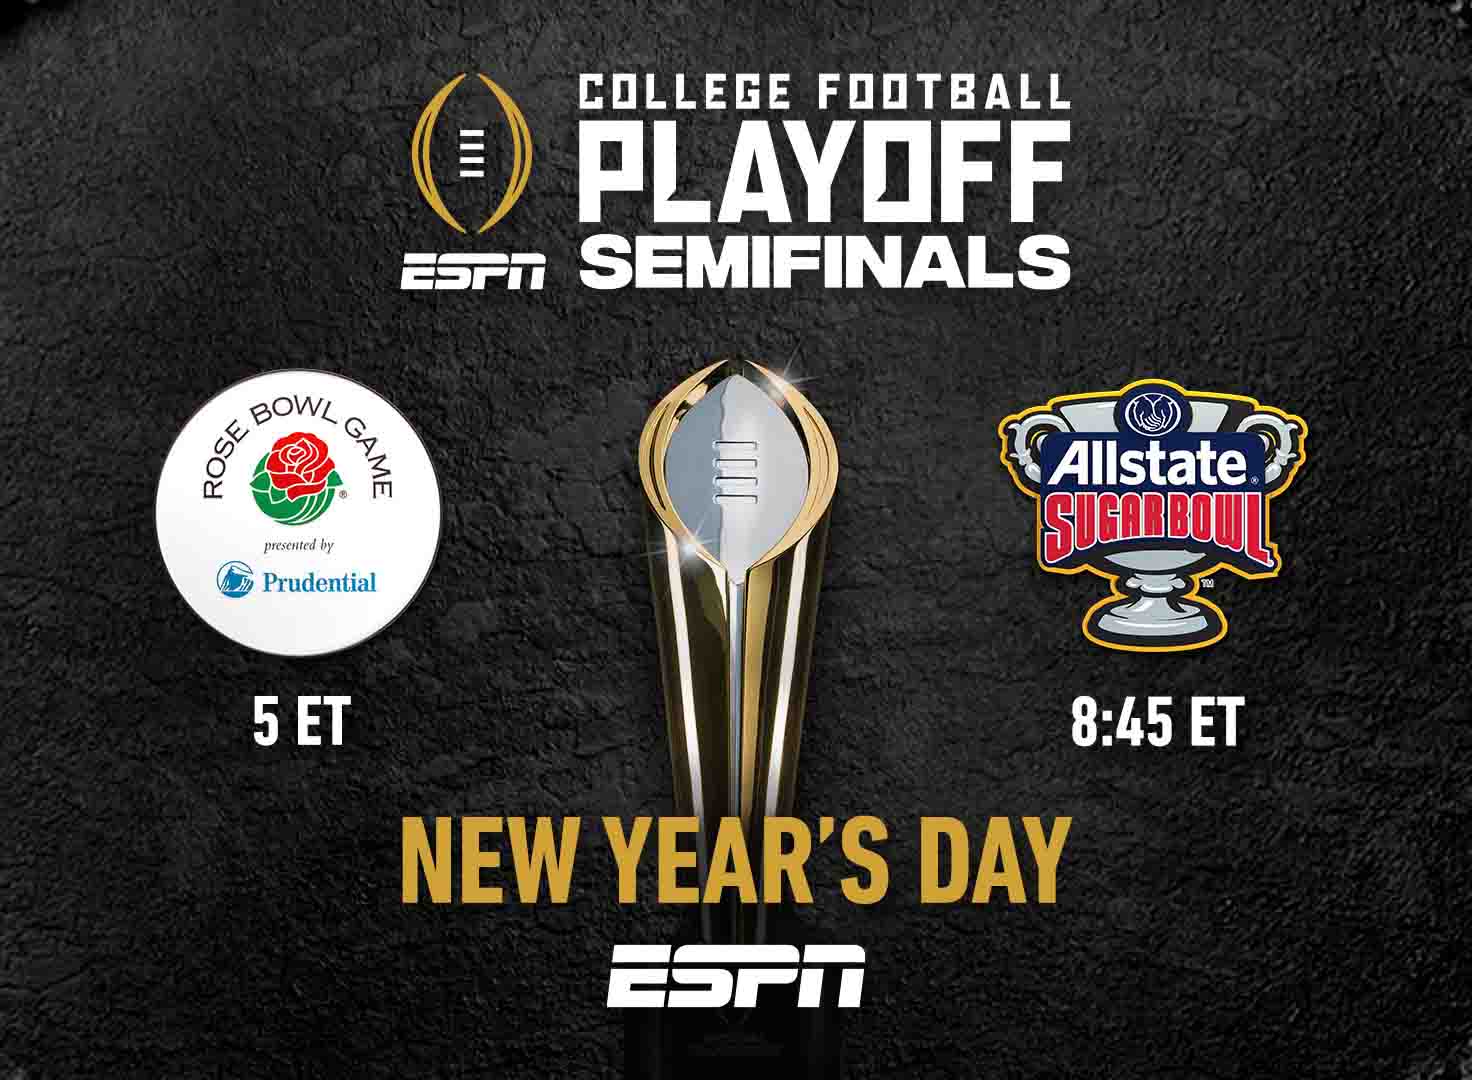 College football bowl games: 2022-23 selections, schedule